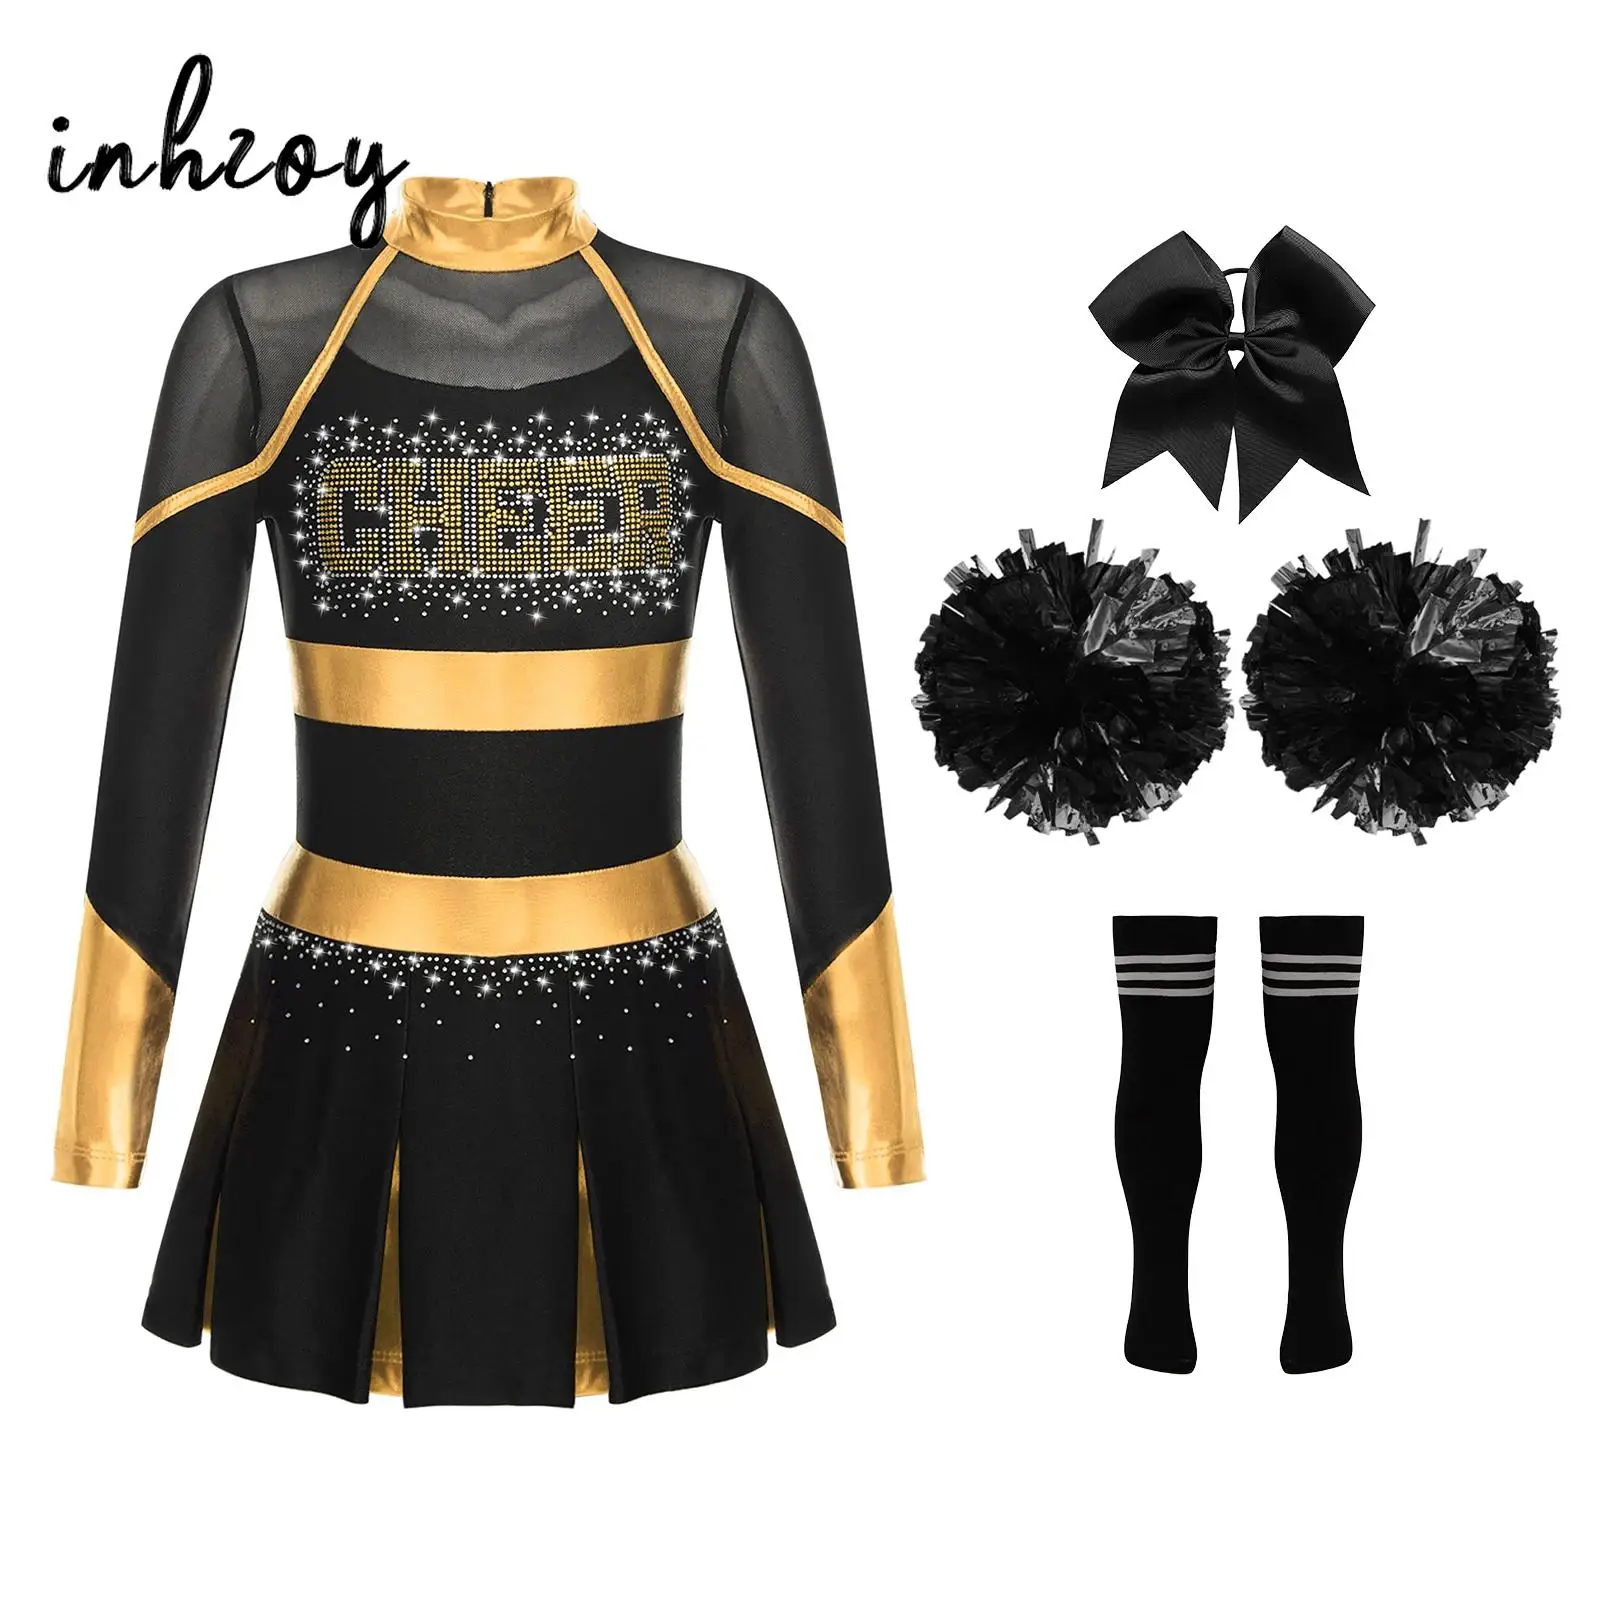 

Kids Girls Cheerleader Costumes Sets Cheerleading Uniform Dance Dress with Pompom Outfits Halloween Cosplay Party Fancy Dress Up